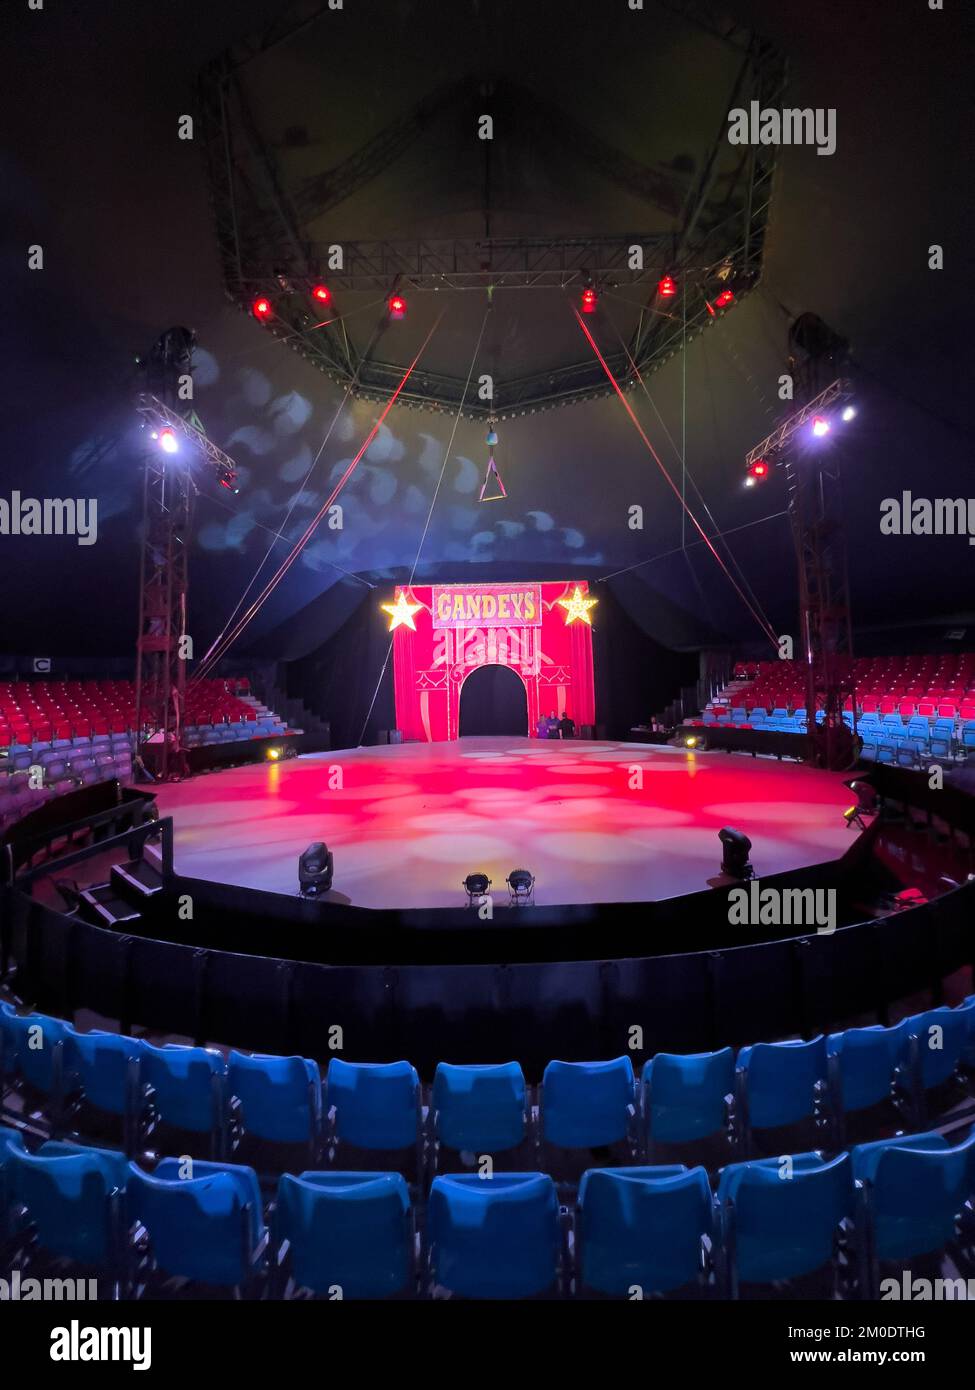 Interior view inside a circus tent before the live performance started. Stock Photo